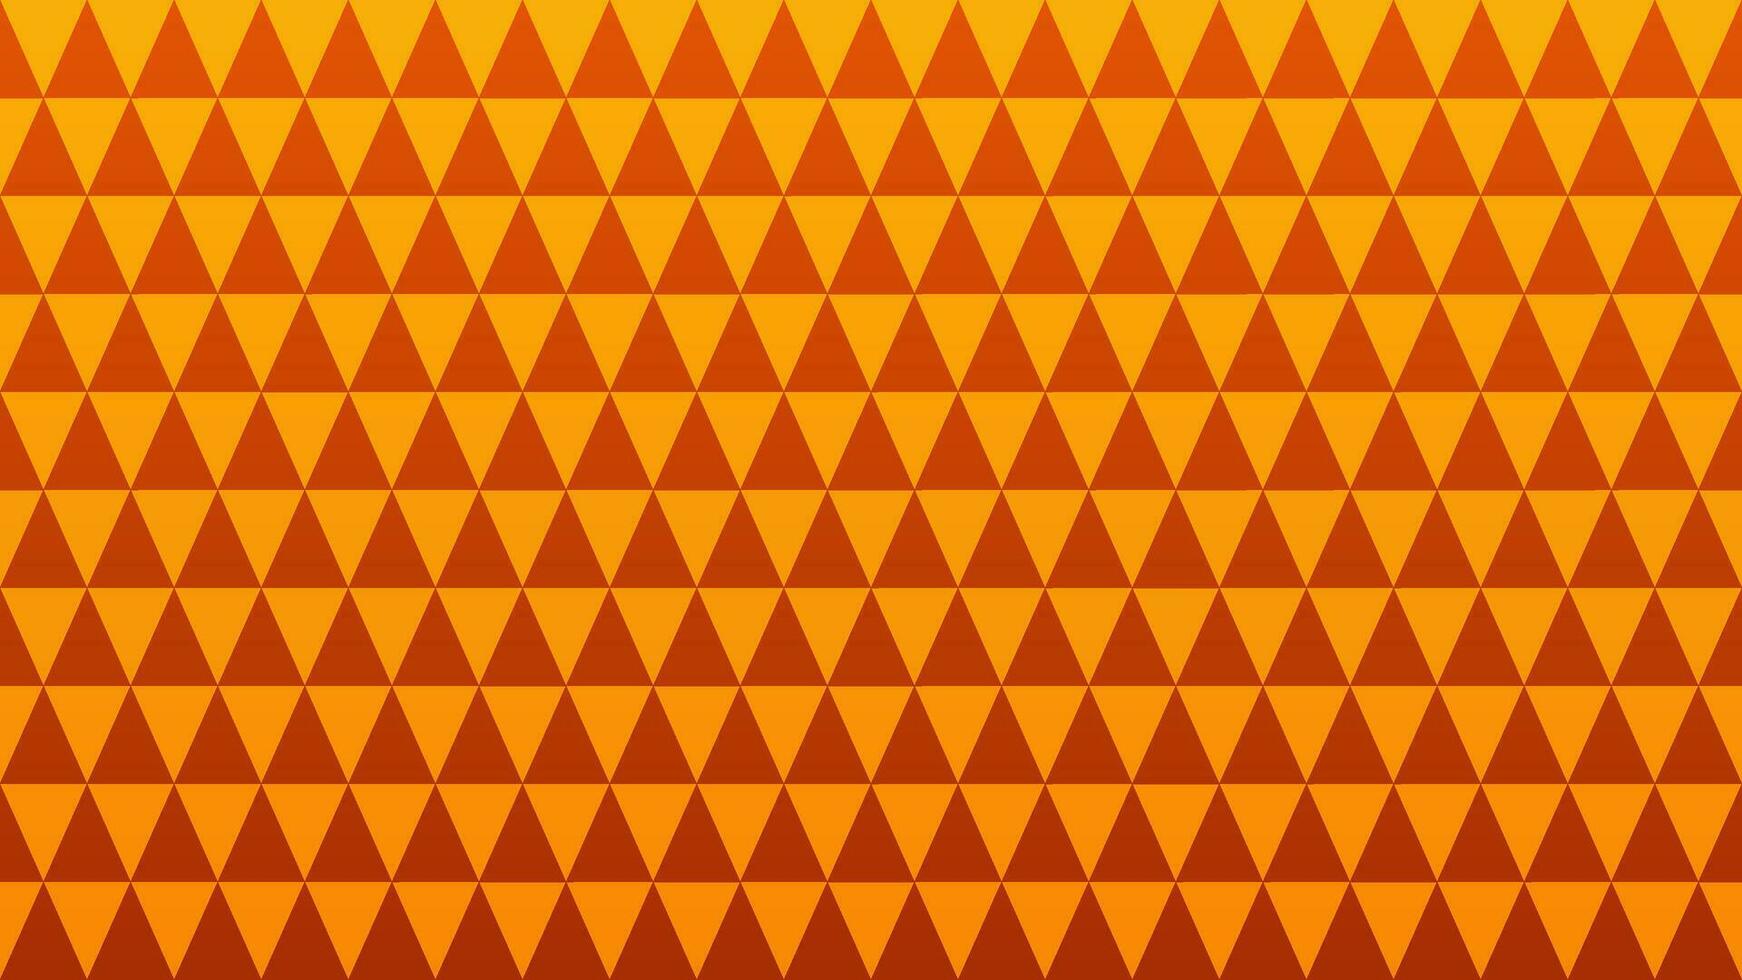 Autumn pattern vector illustration. Triangle pattern with gradient fall color. Fall season pattern for background, texture, decoration or wrapping. Triangles texture with shiny brown and orange